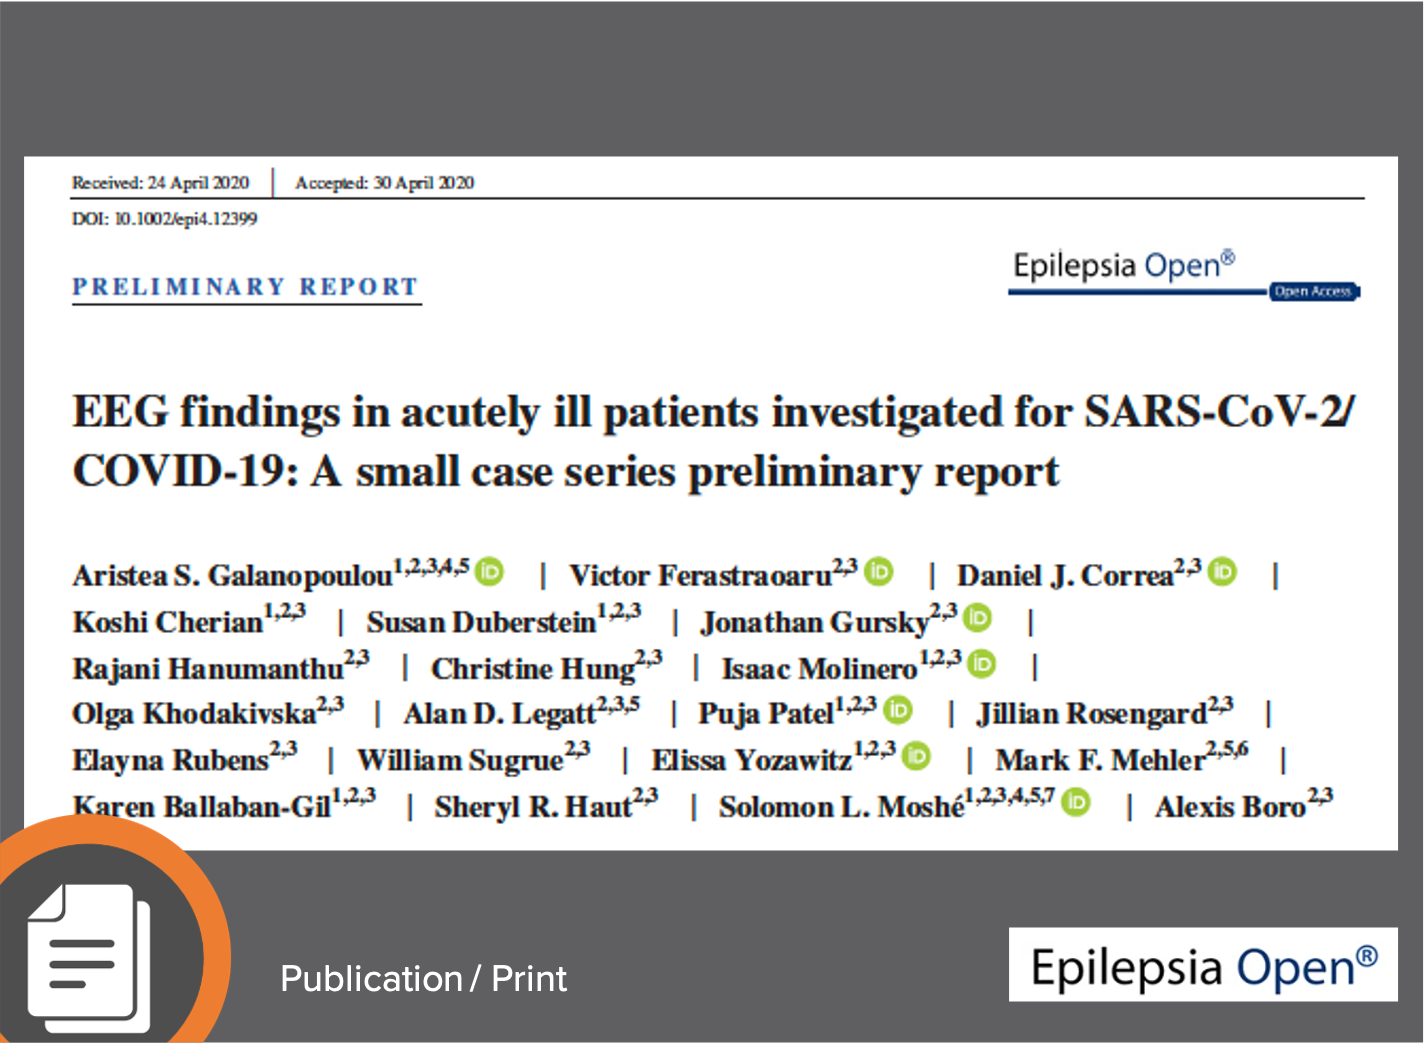 EEG Findings in Acutely Ill Patients Investigated For SARS-Cov-2/COVID-19: A Small Case Series Preliminary Report